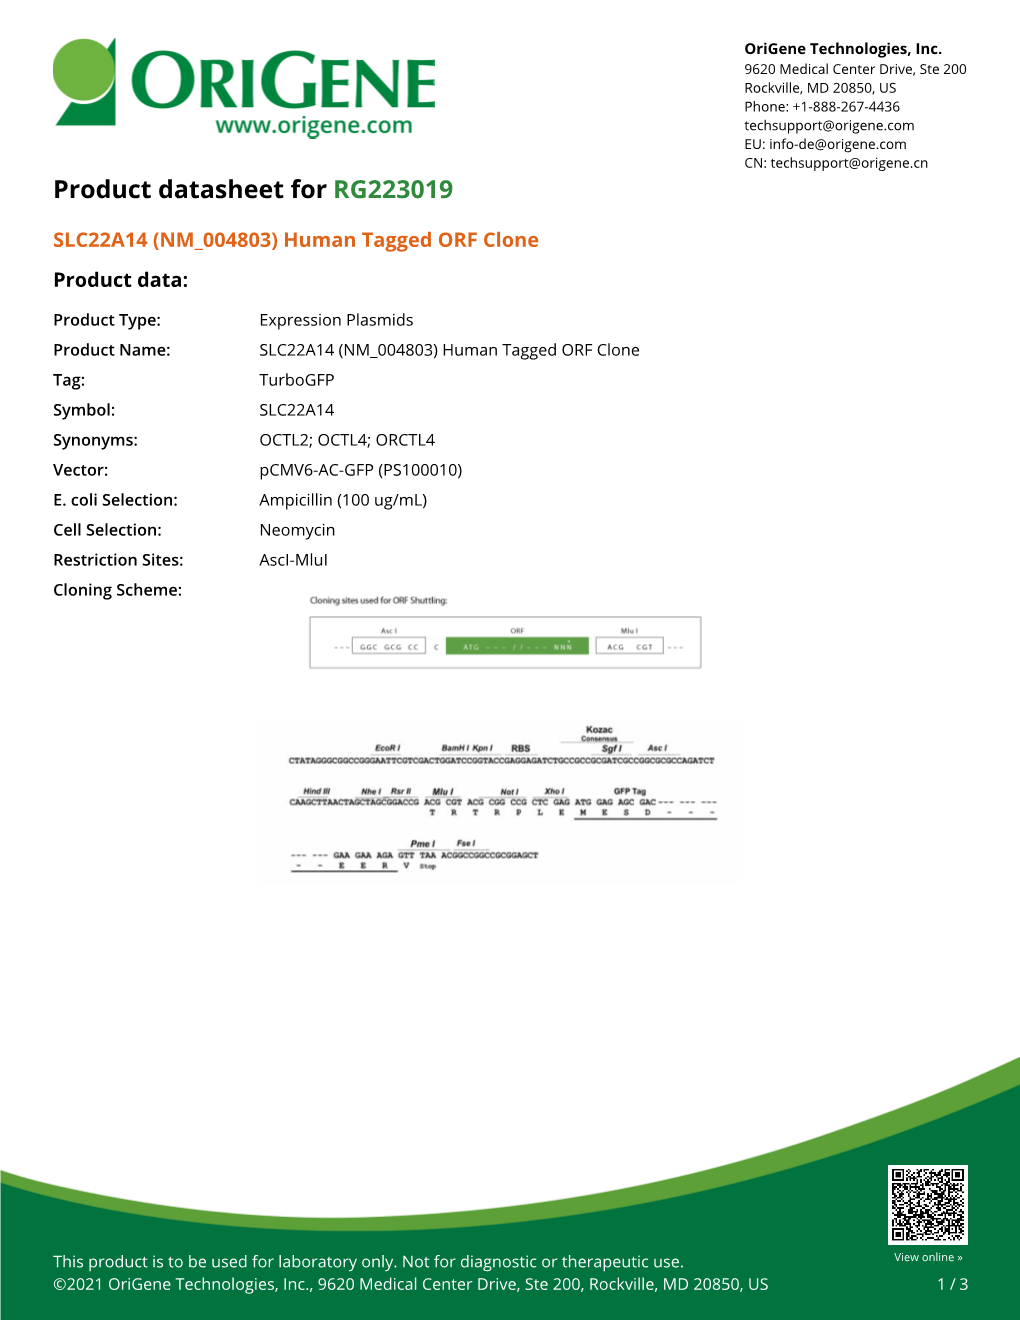 SLC22A14 (NM 004803) Human Tagged ORF Clone Product Data